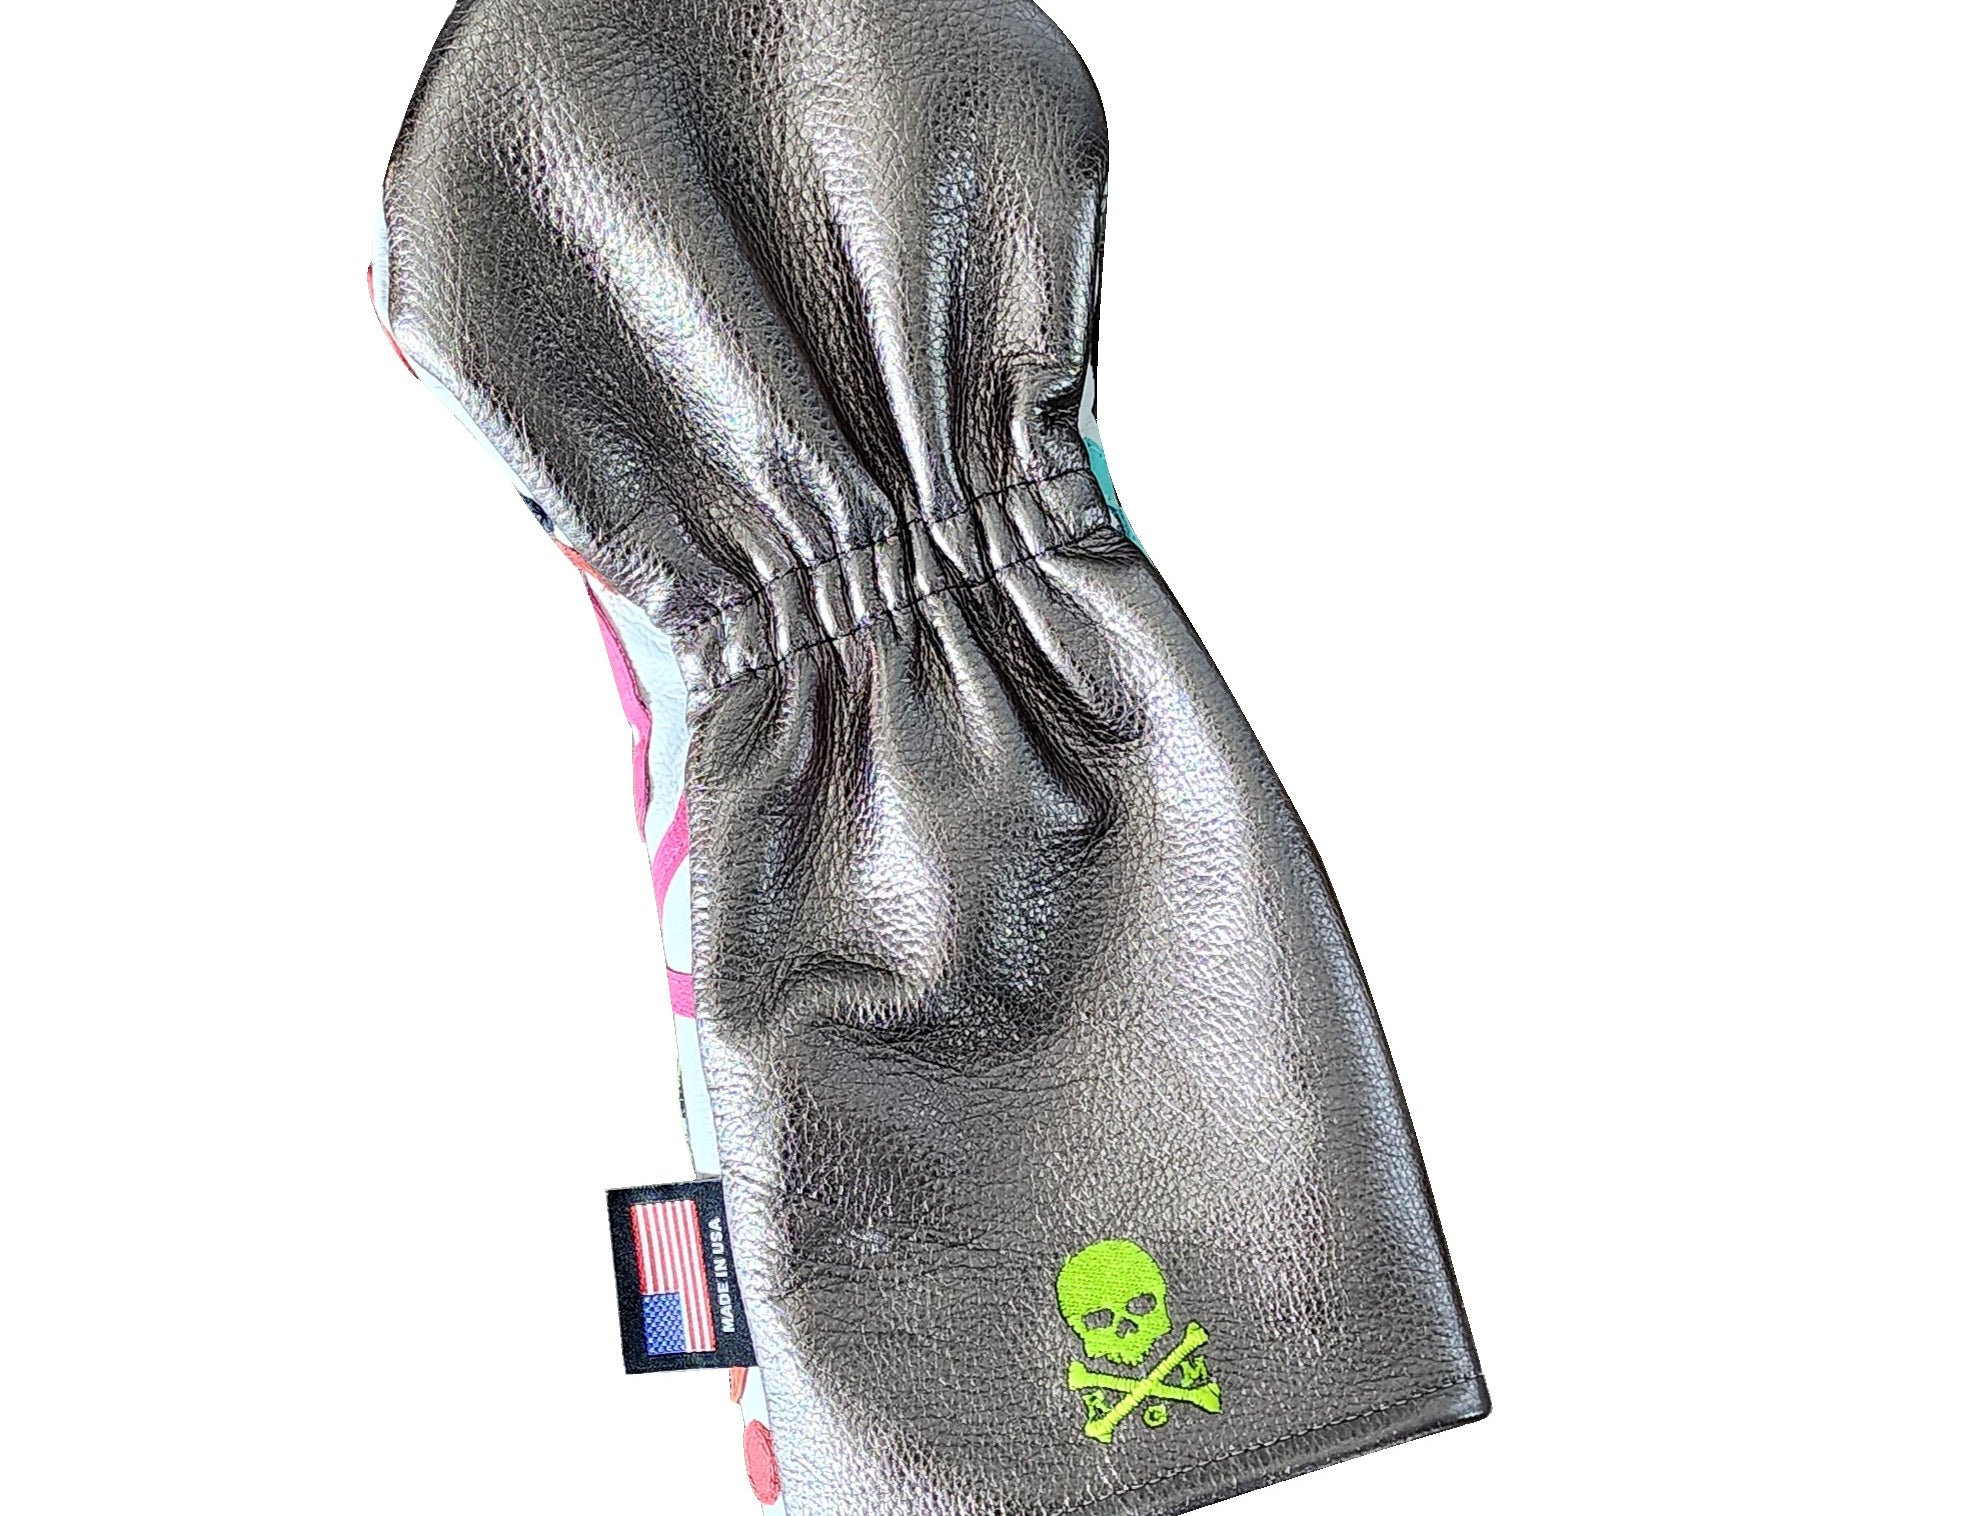 New! Rare! Limited Edition! The RMG Collage Driver Headcover - Robert Mark Golf